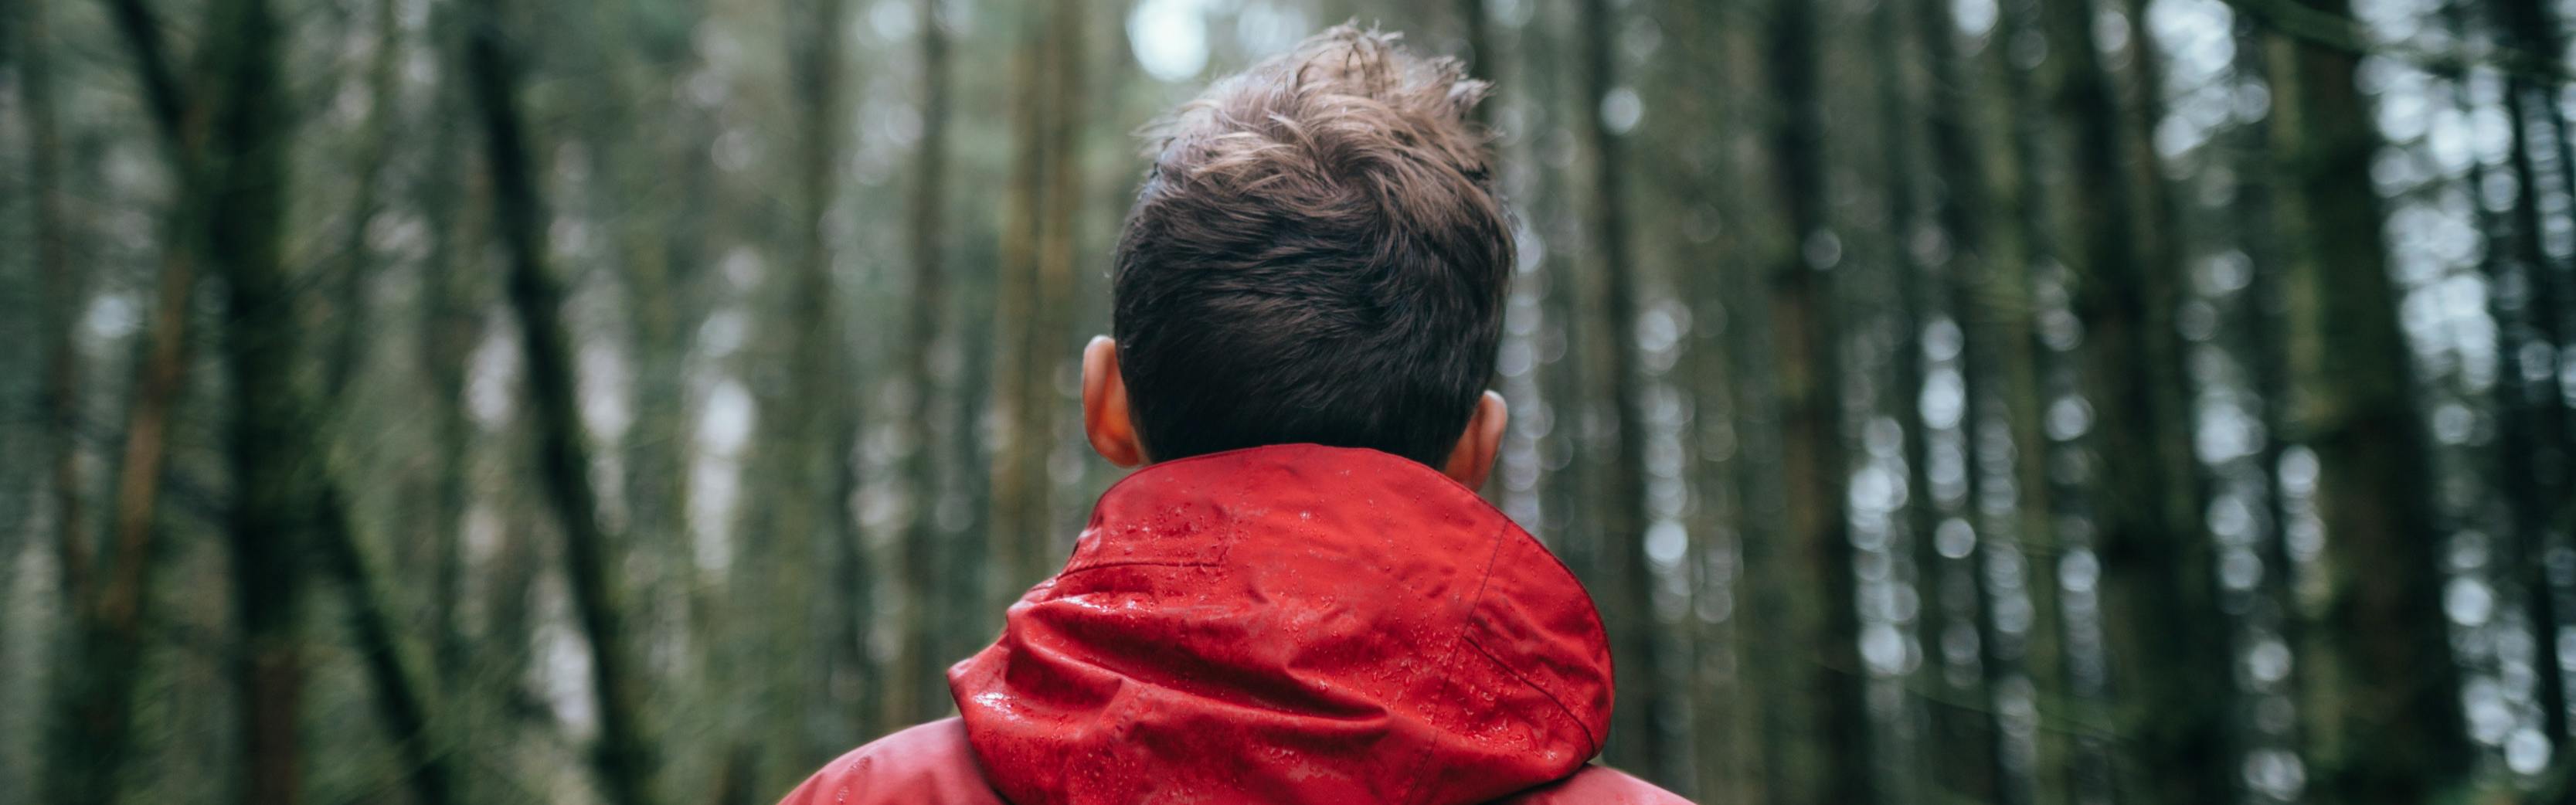 A man with a red jacket faces away from the camera in a forested landscape.